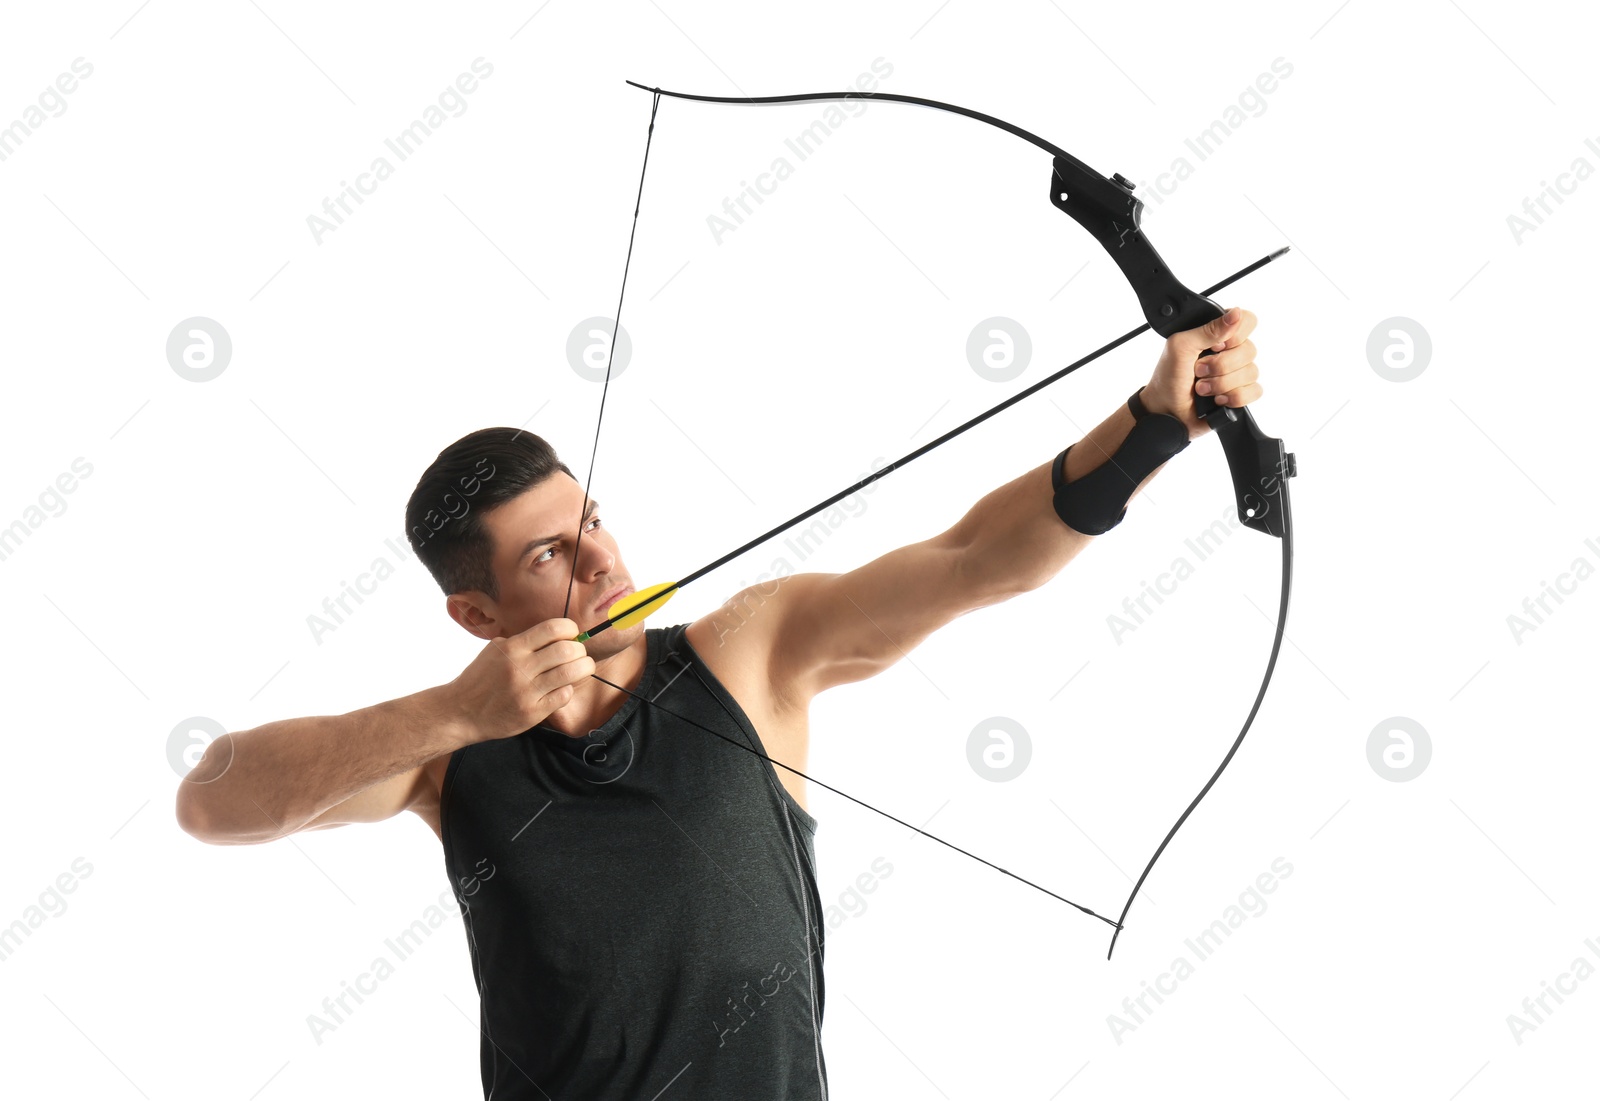 Photo of Man with bow and arrow practicing archery on white background